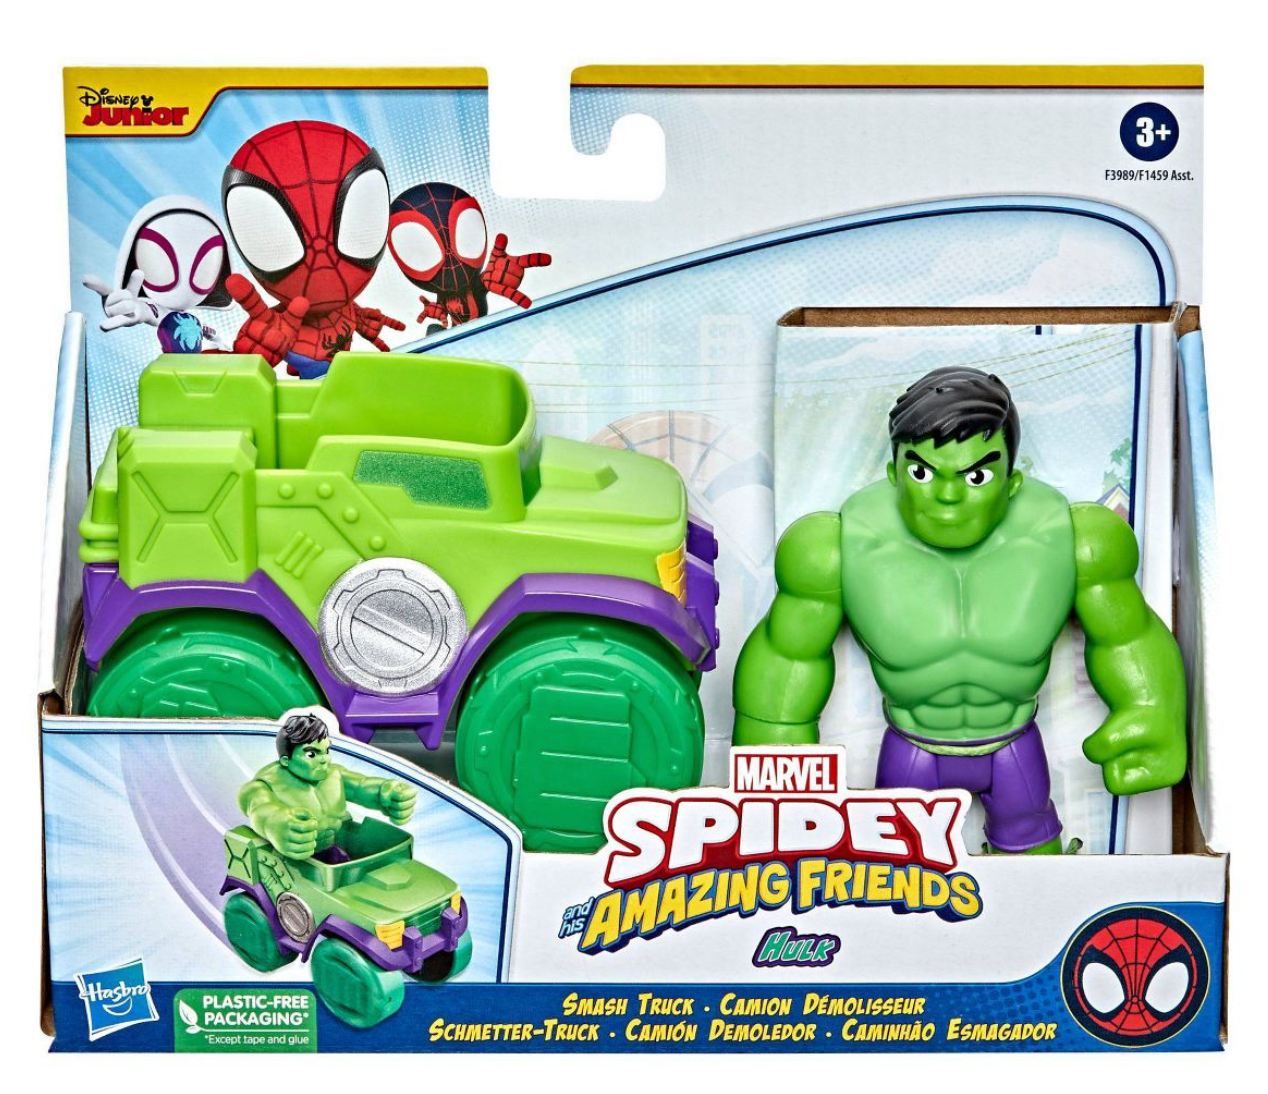 Marvel Spidey and His Amazing Friends Hulk Smash Truck Toy New w Box